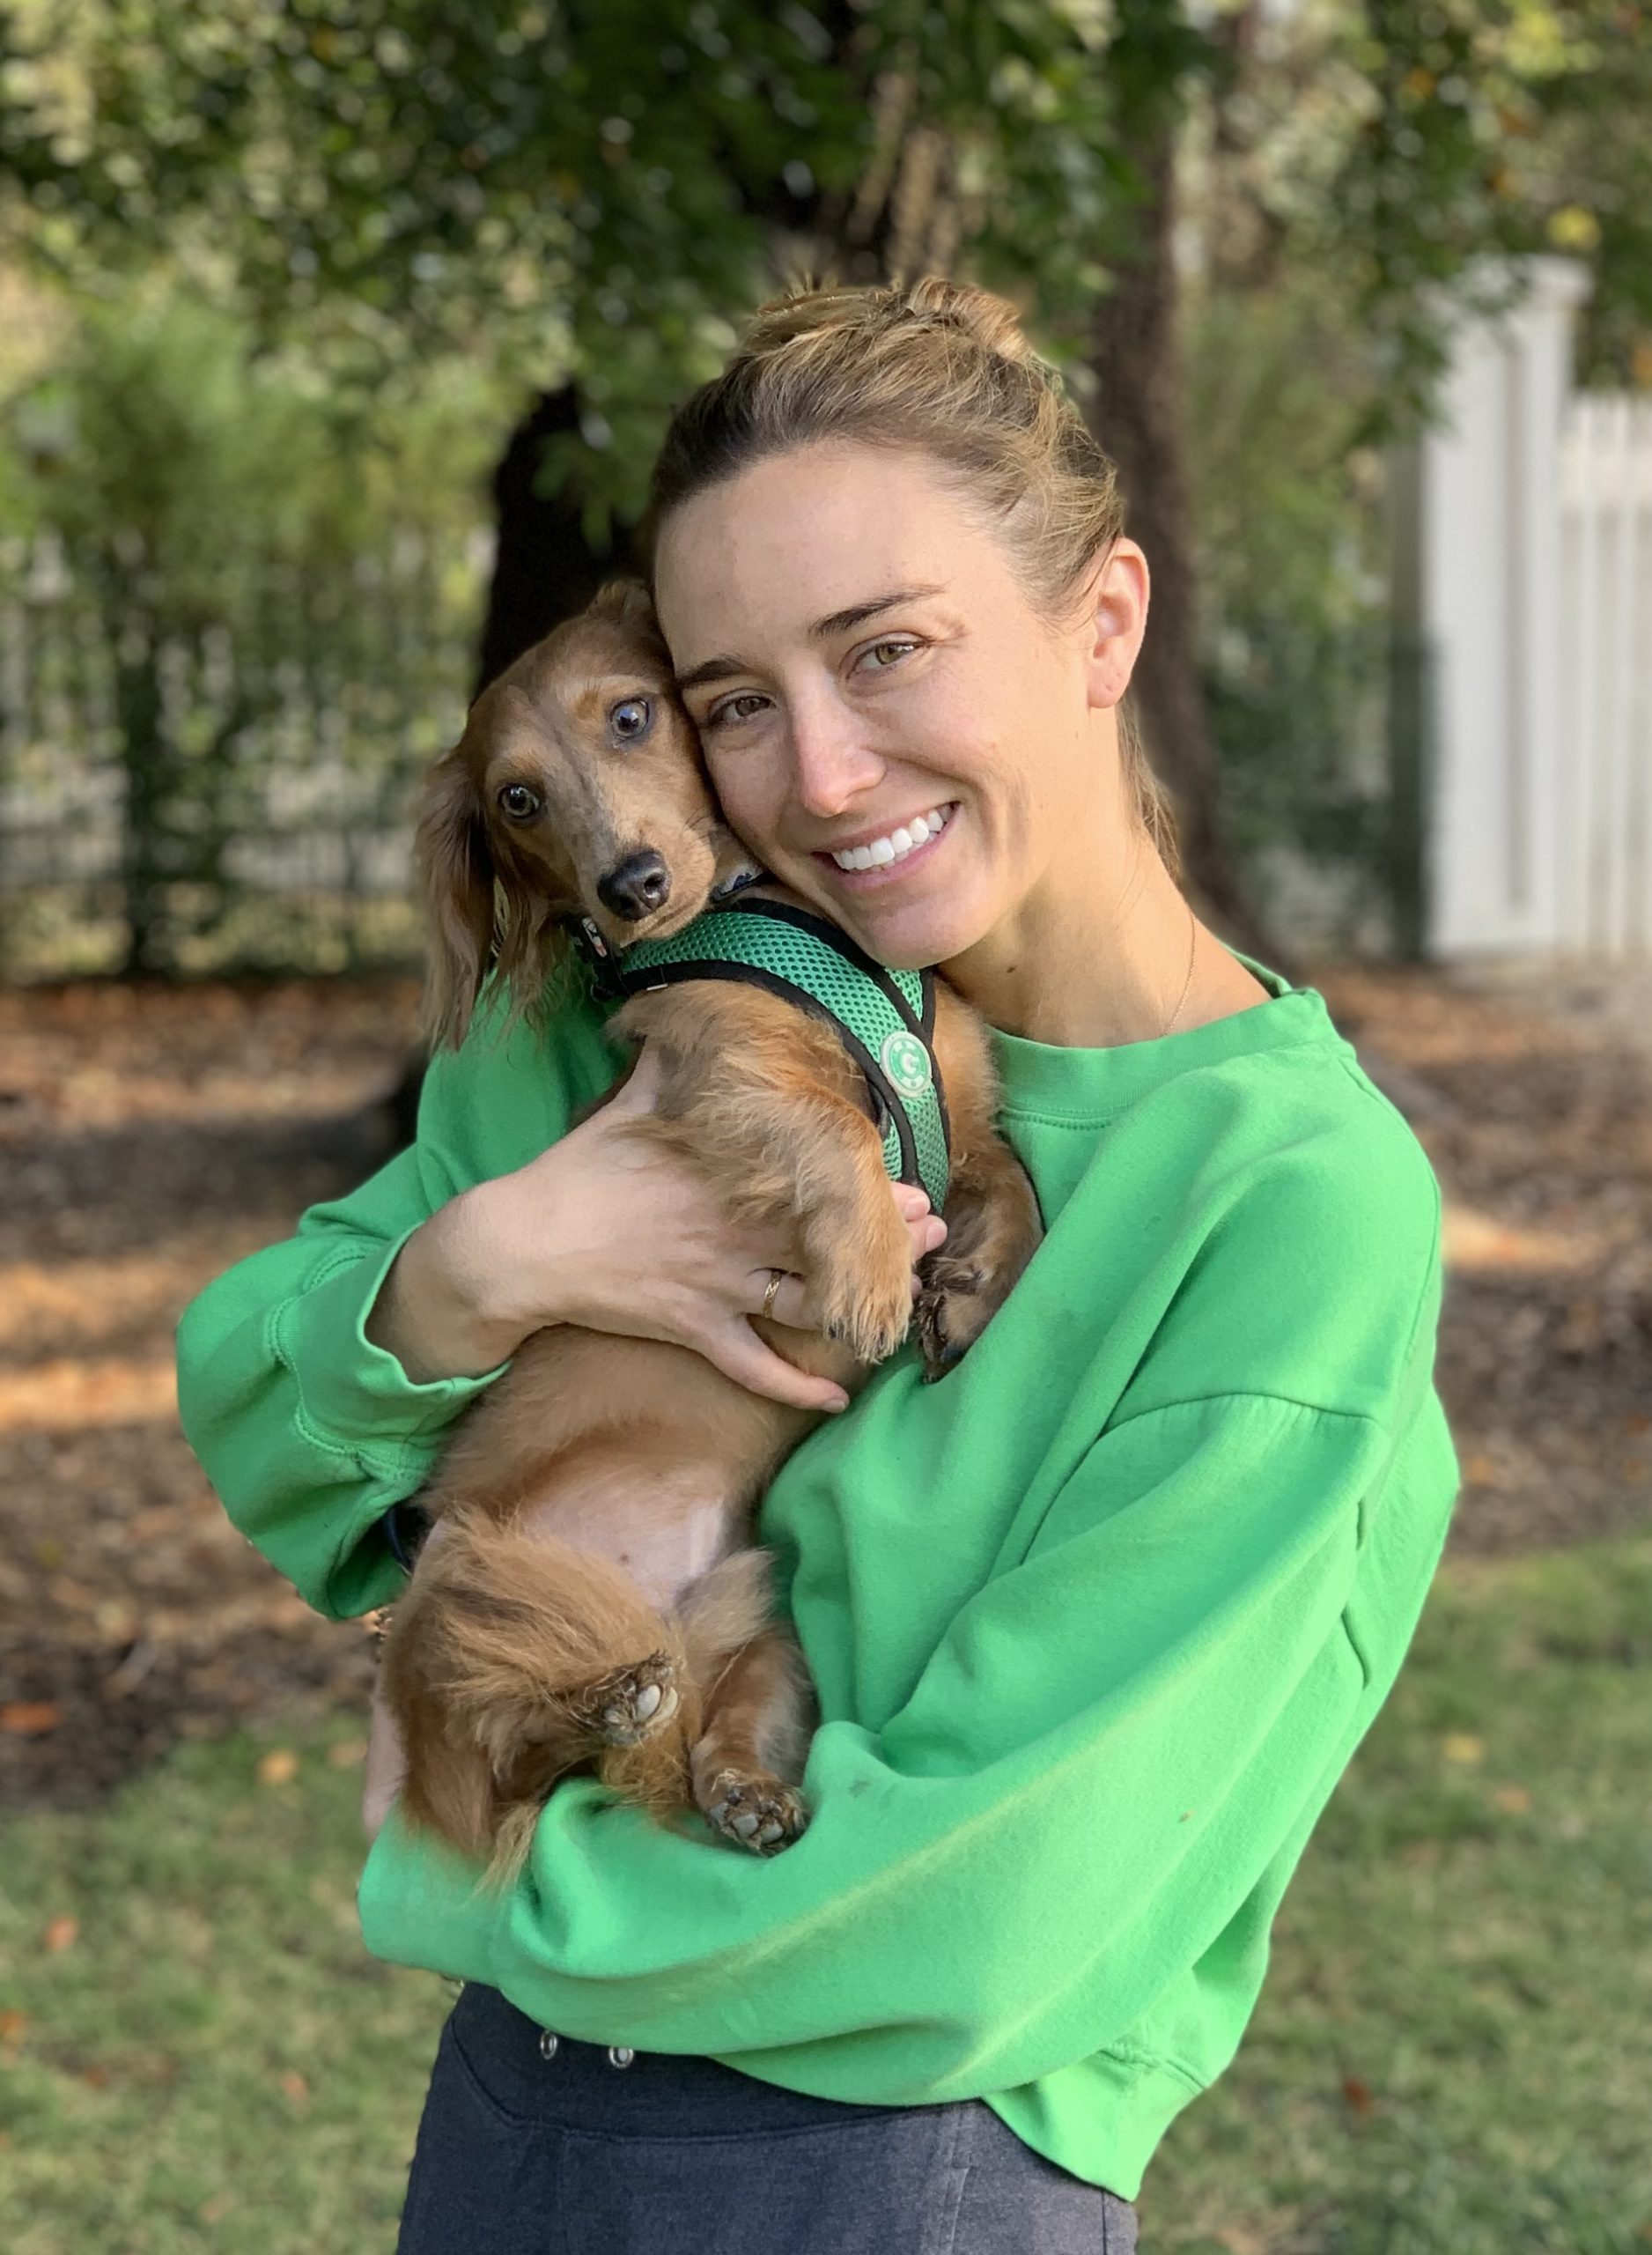 closeup shot of a woman in green shirt with a dog